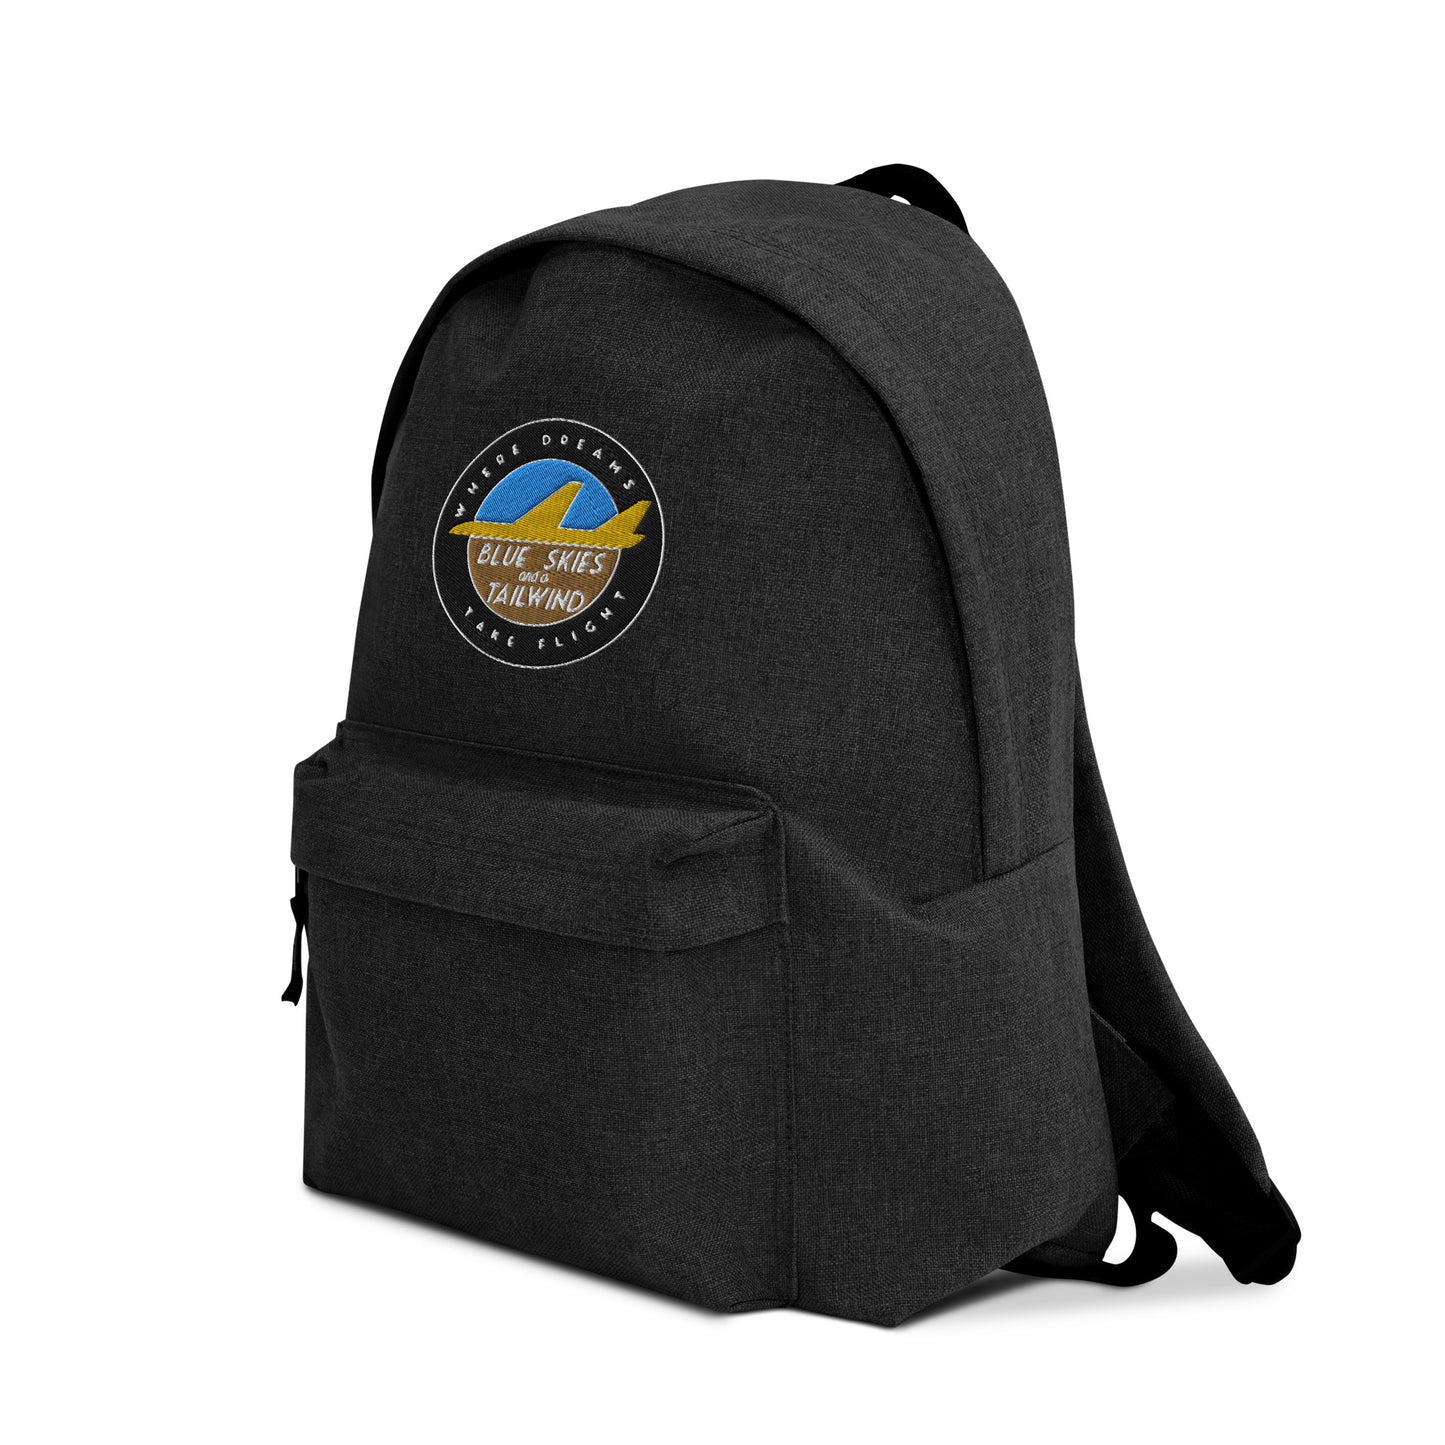 Blue Skies and a Tailwind Embroidered Backpack